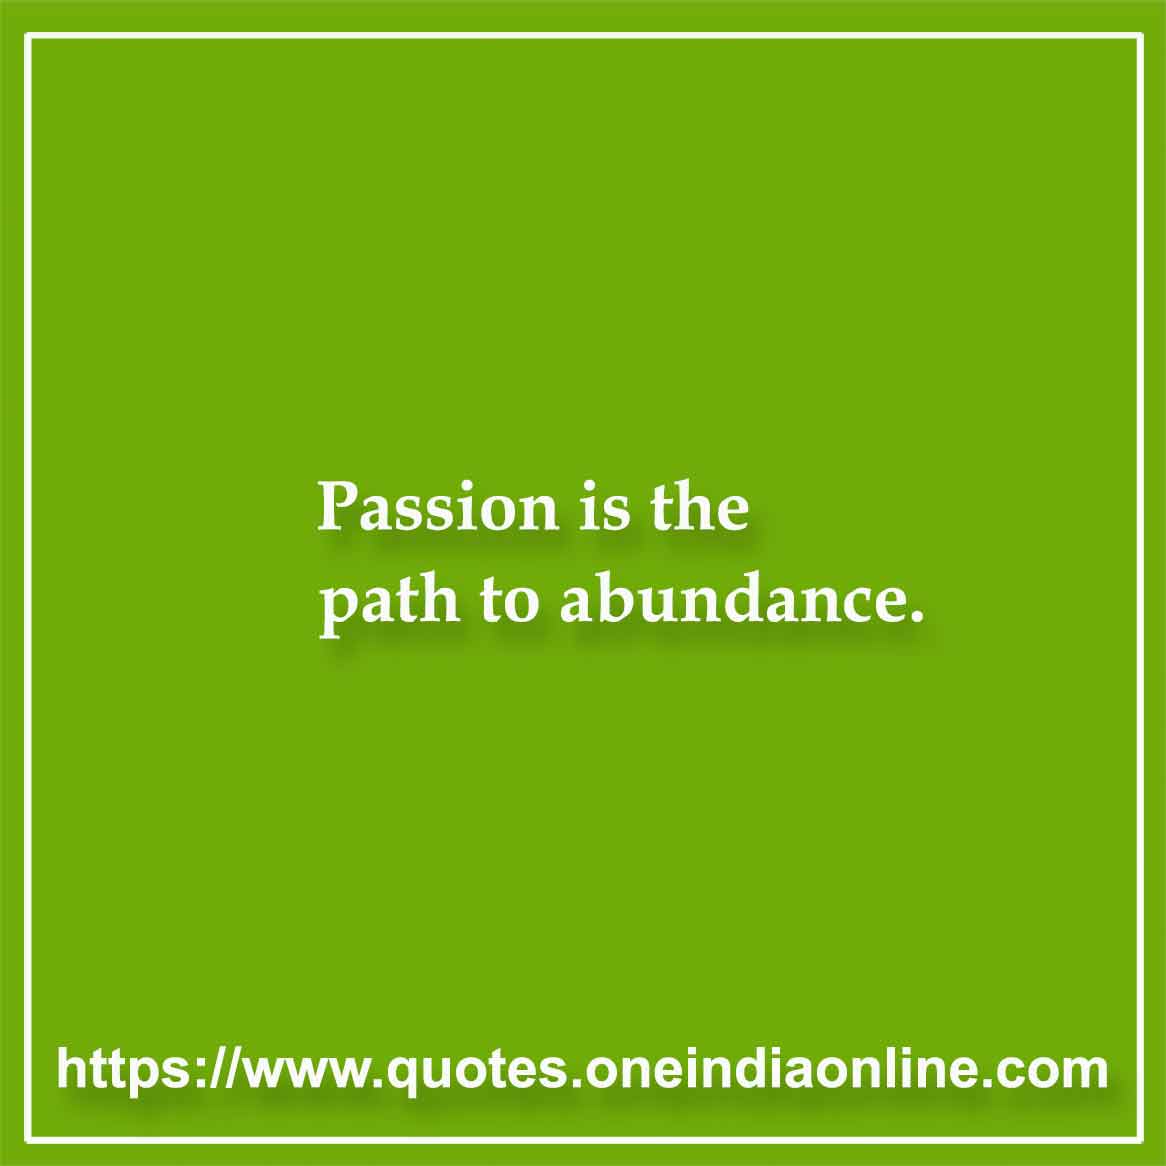 Passion is the path to abundance.